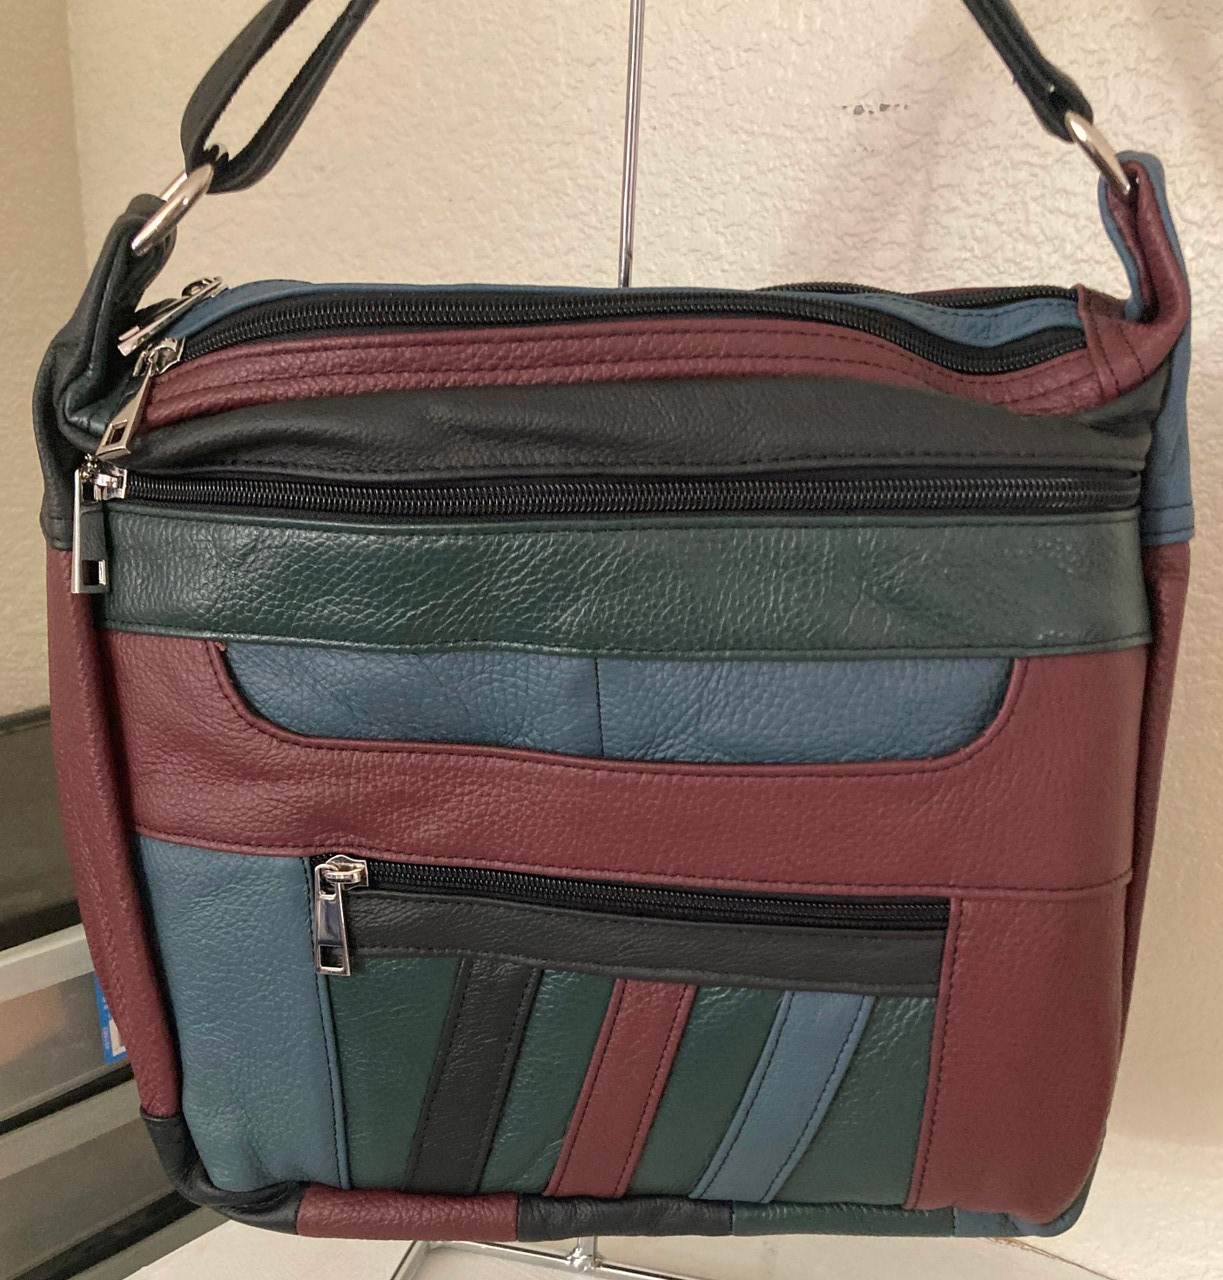 Buy our Roma Cross Body Concealed Carry Handbag.